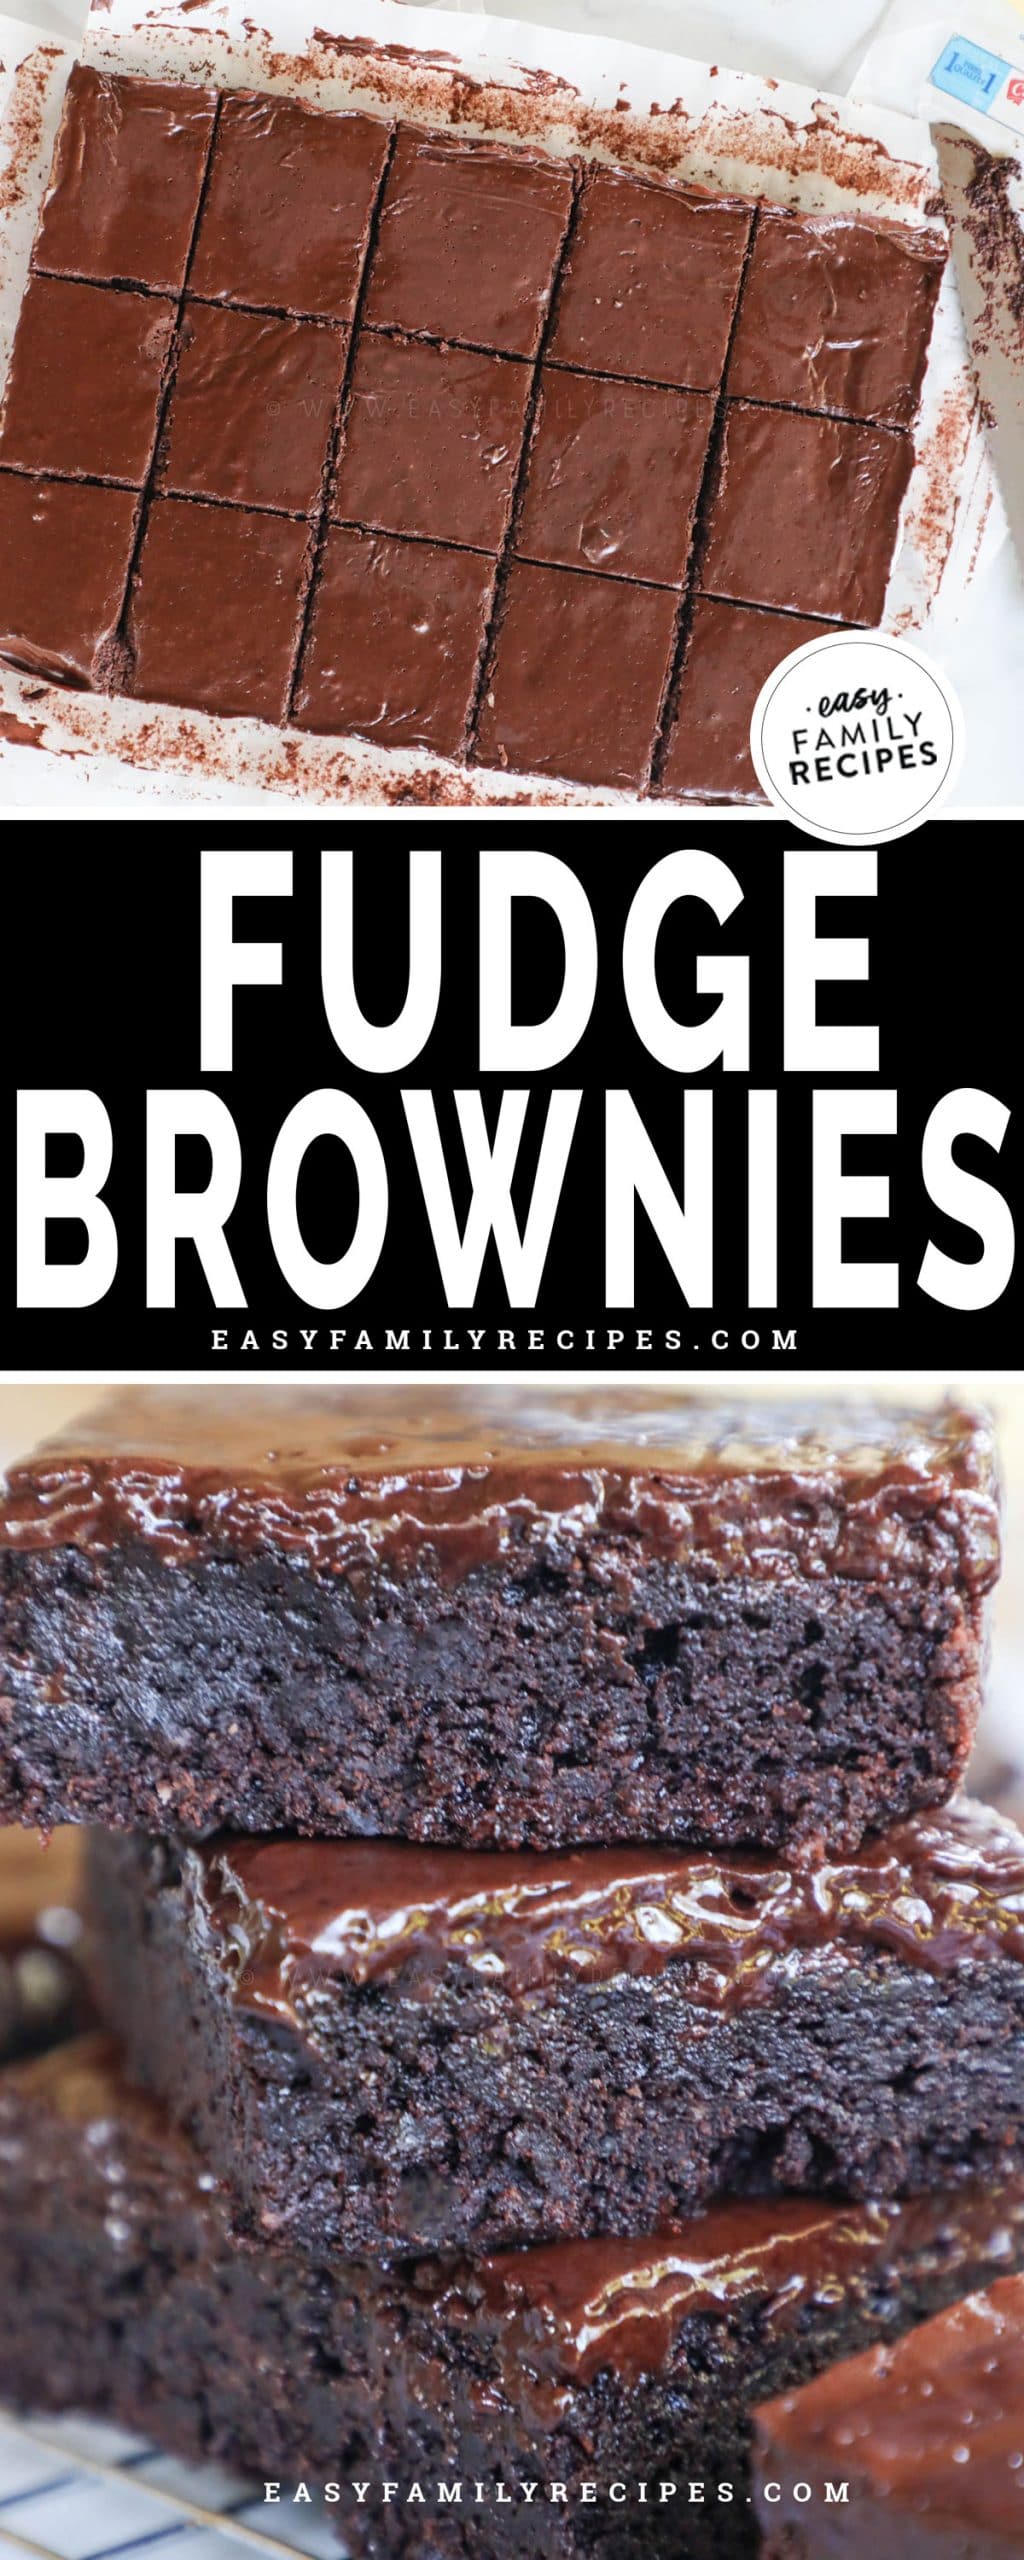 Pan of chocolate fudge brownies that have been cut into squares